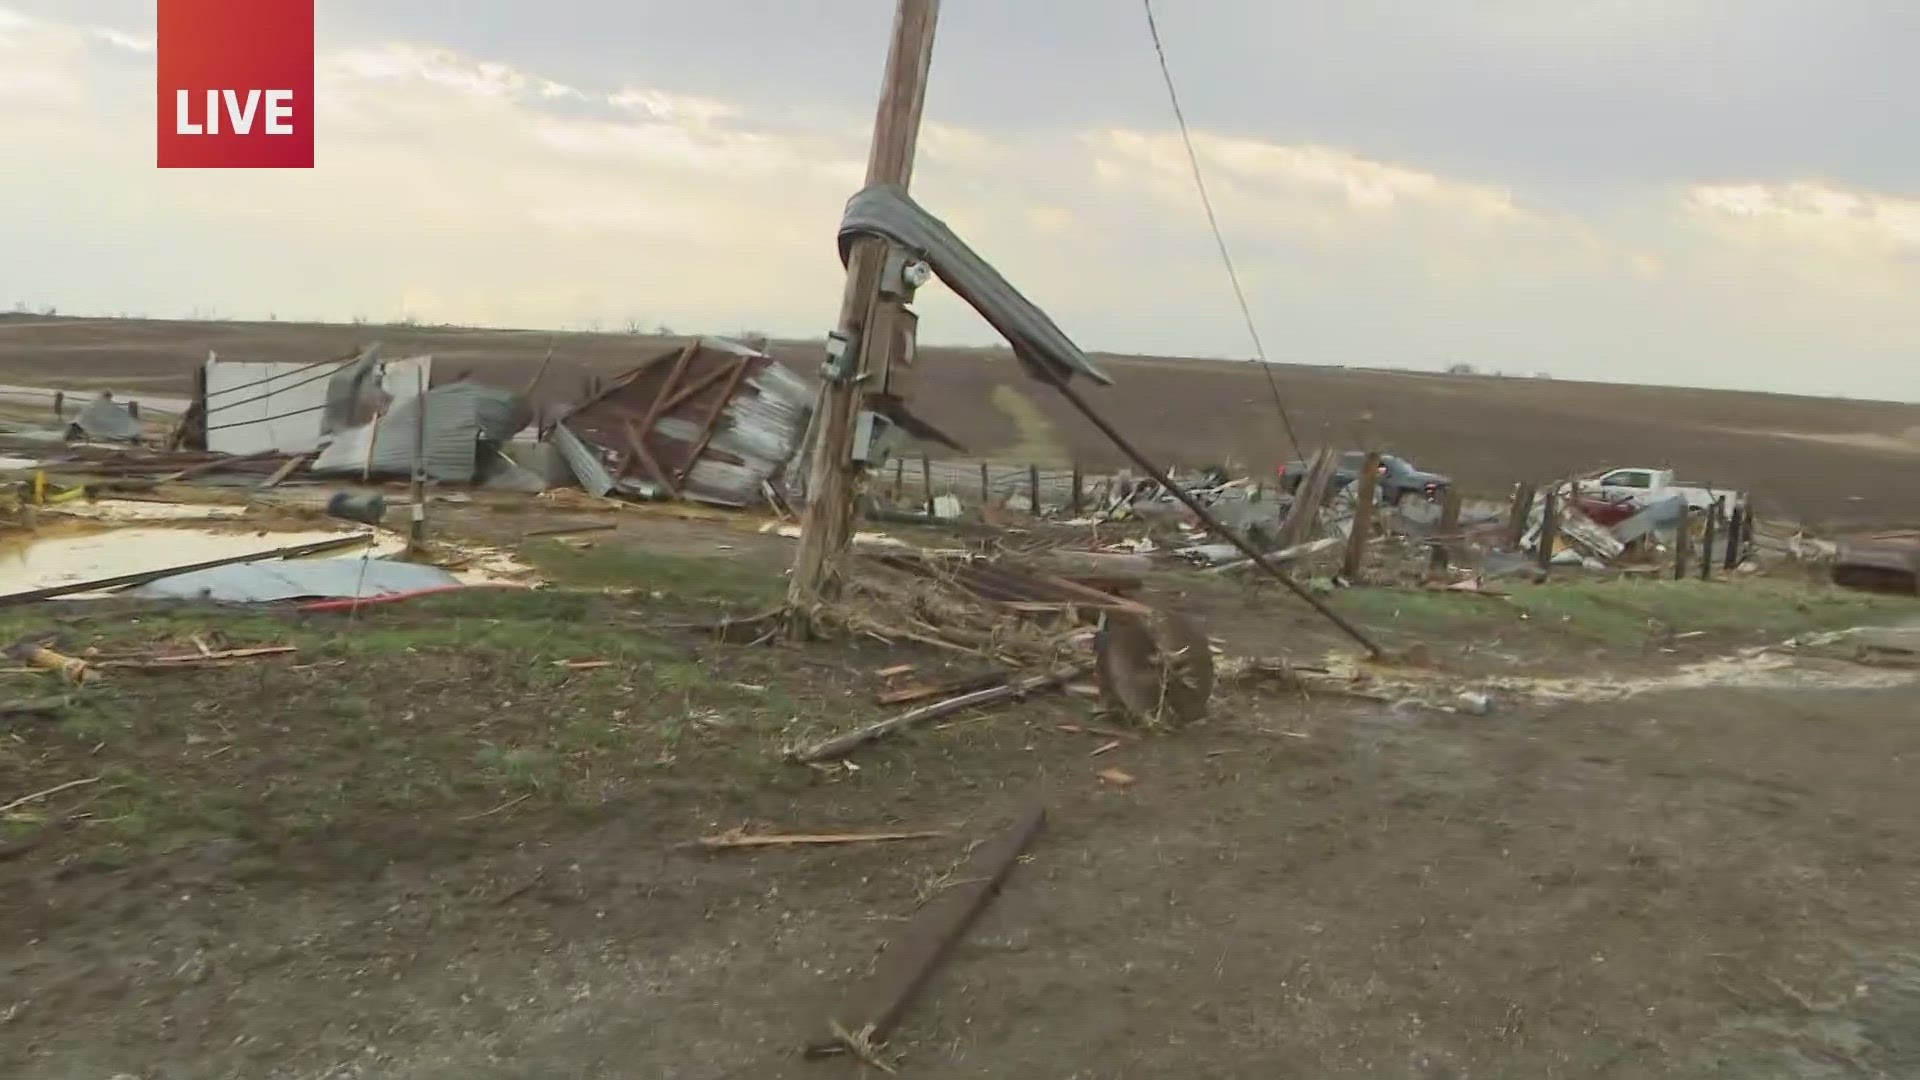 Local 5's Evan Bunkers was live in rural Iowa, taking in the damage and talking to locals following severe storms Friday.